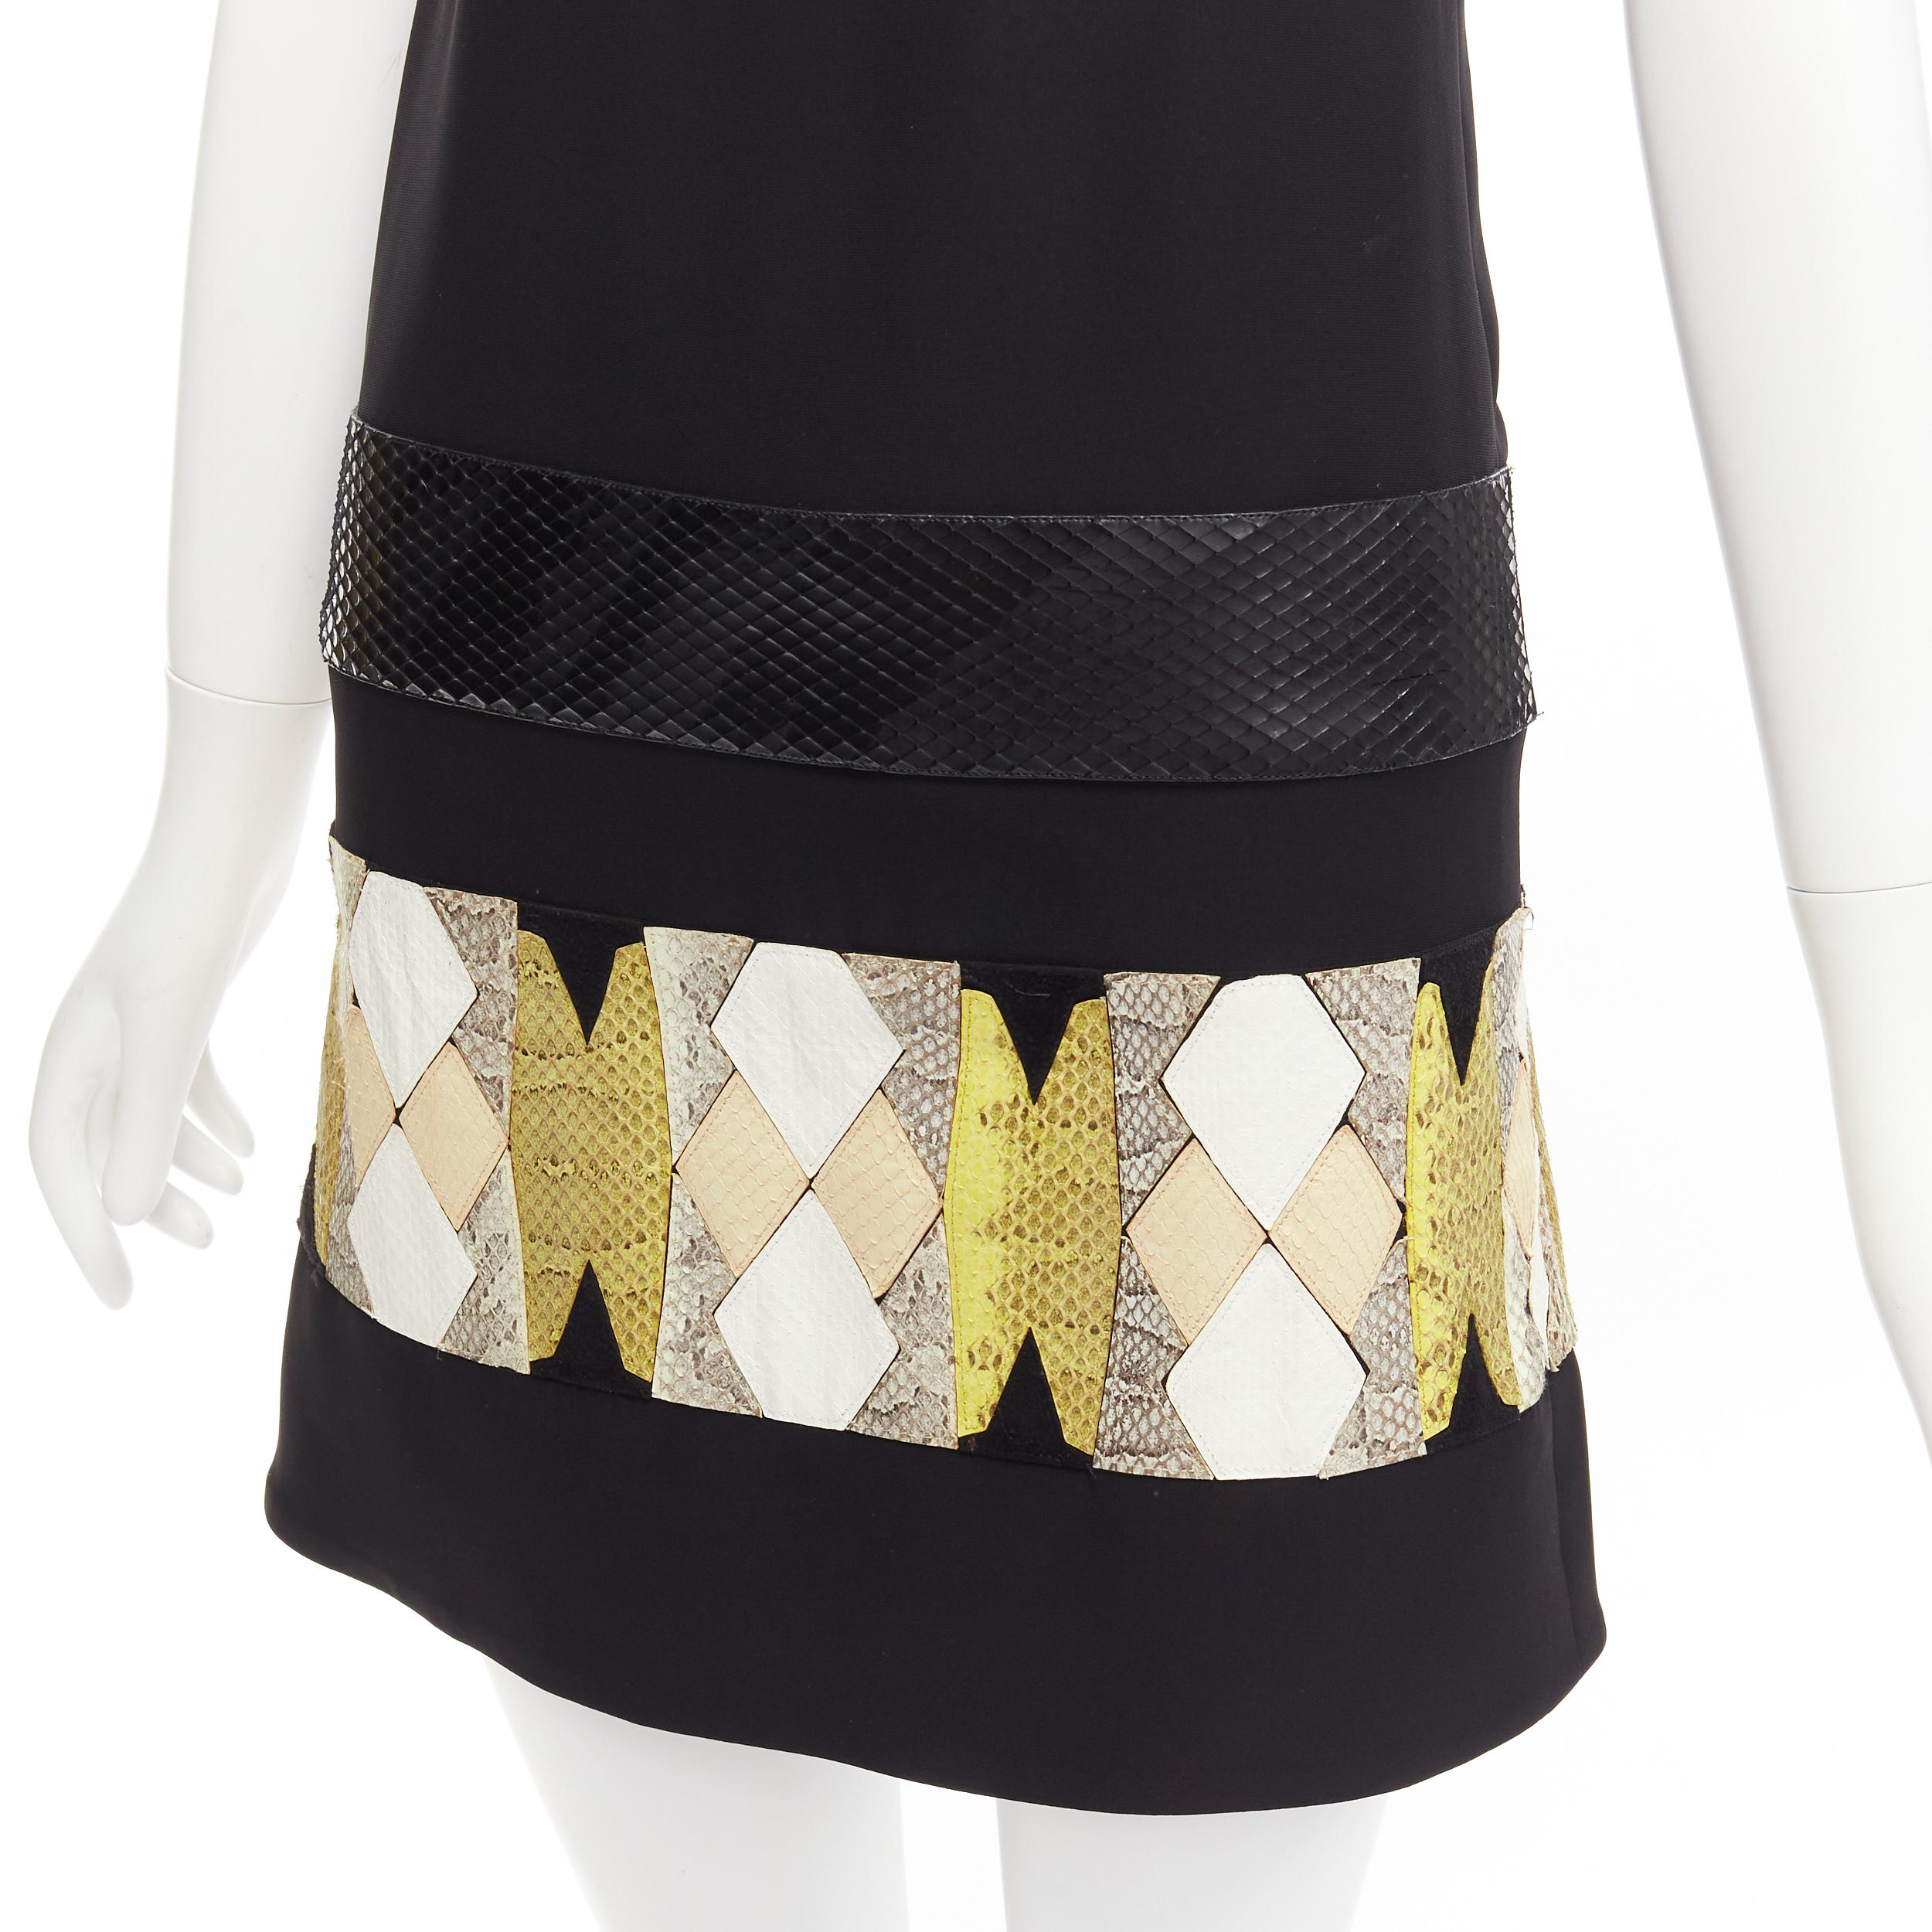 VERSACE 2014 black scaled leather patchwork sheer panel mod mini shift dress
Reference: CC/A00394
Brand: Versace
Designer: Donatella Versace
Collection: 2014
Material: Fabric, Leather
Color: Black, Beige
Pattern: Animal Print
Closure: Zip
Lining: